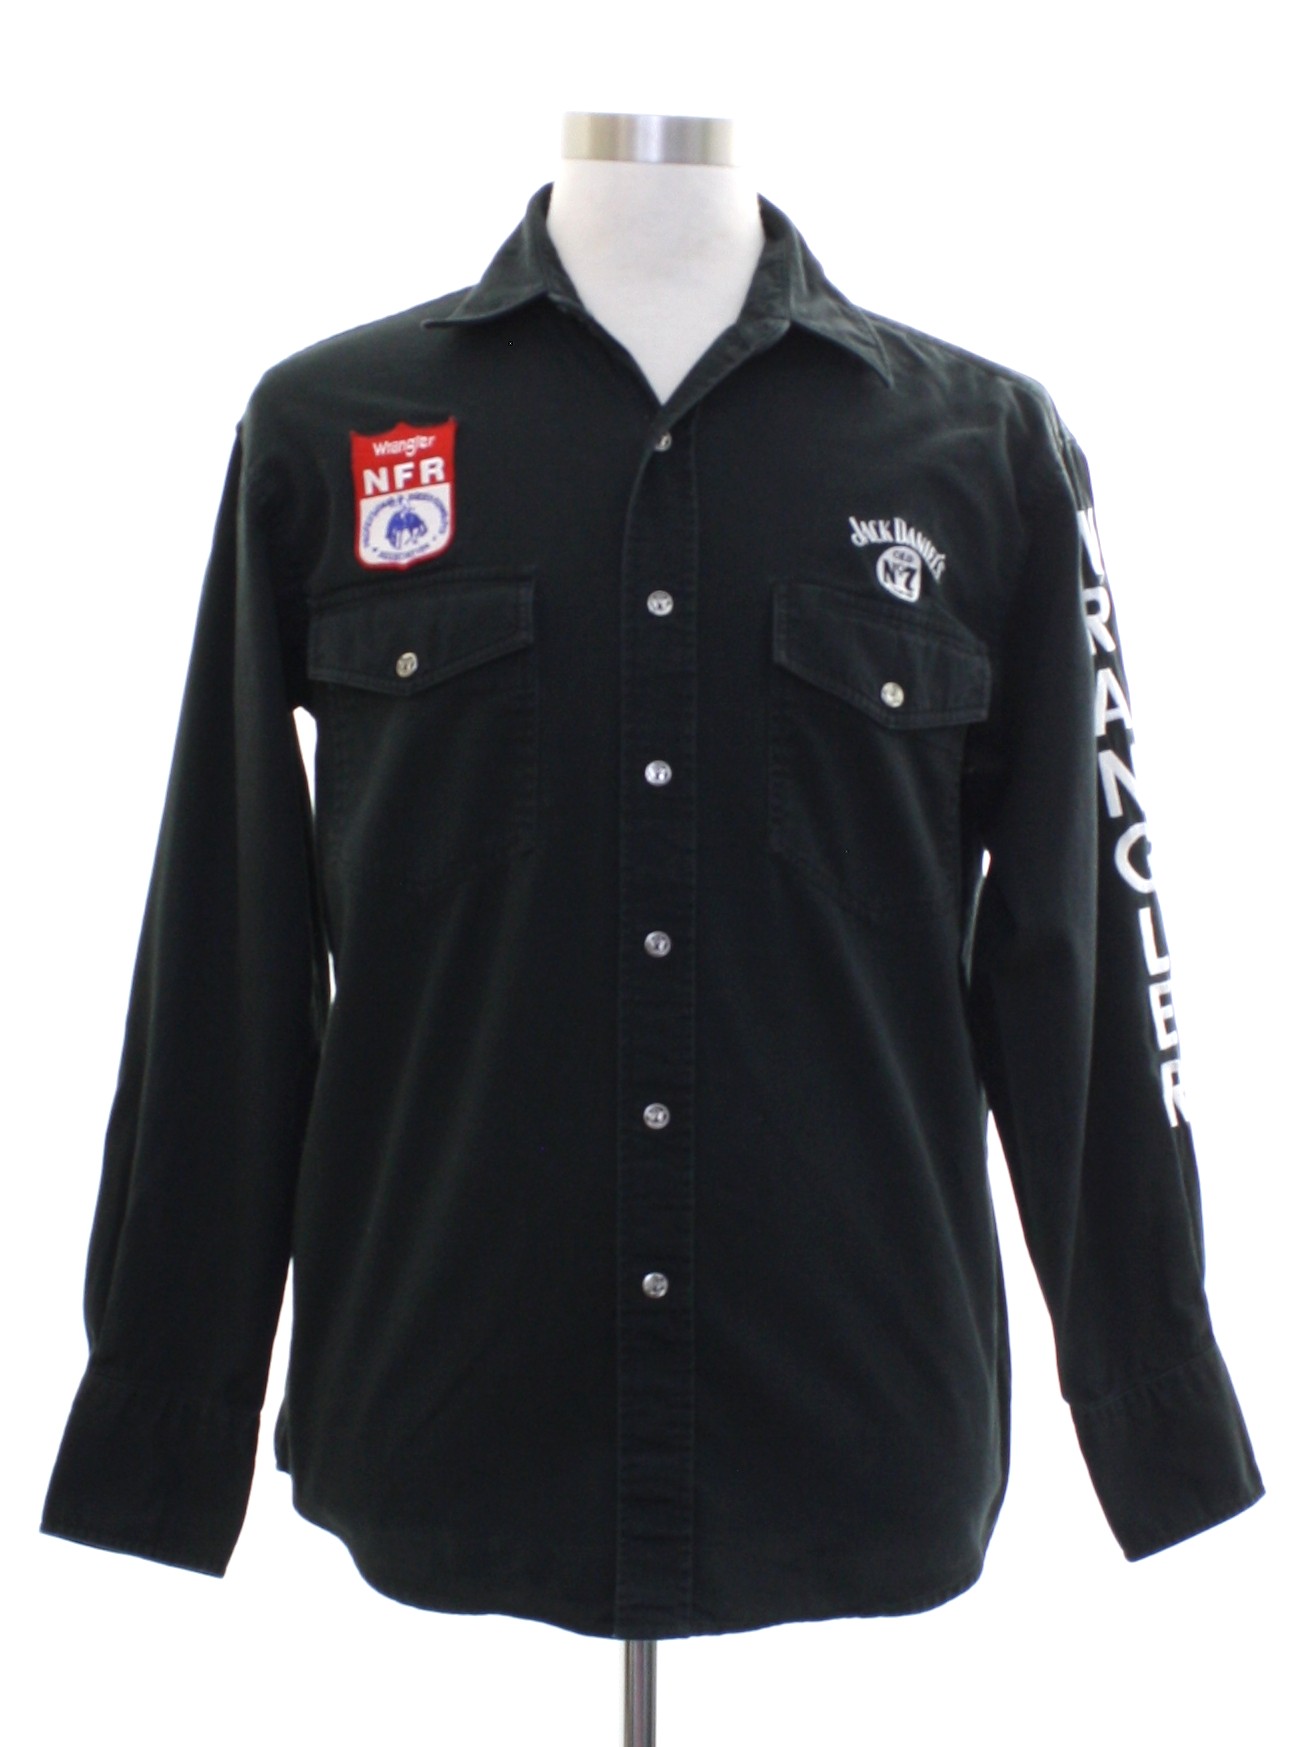 Retro 90s Western Shirt (Wrangler) : Late 90s -Wrangler- Mens black  background cotton longsleeve western shirt. pearlized snaps at front  placket and cuffs. There is a red Wrangler NFR patch above right